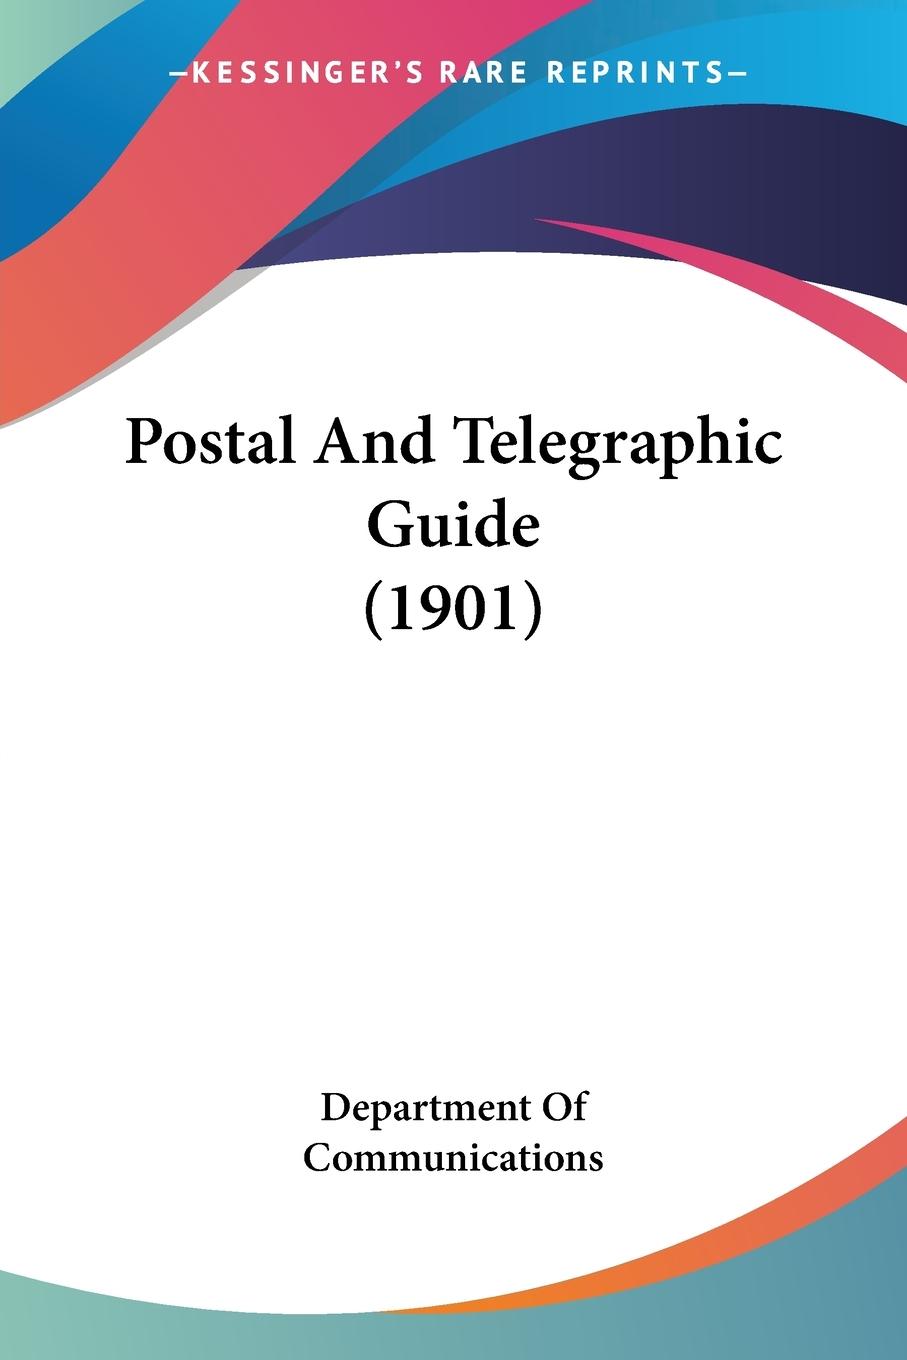 Postal And Telegraphic Guide (1901) - Department Of Communications